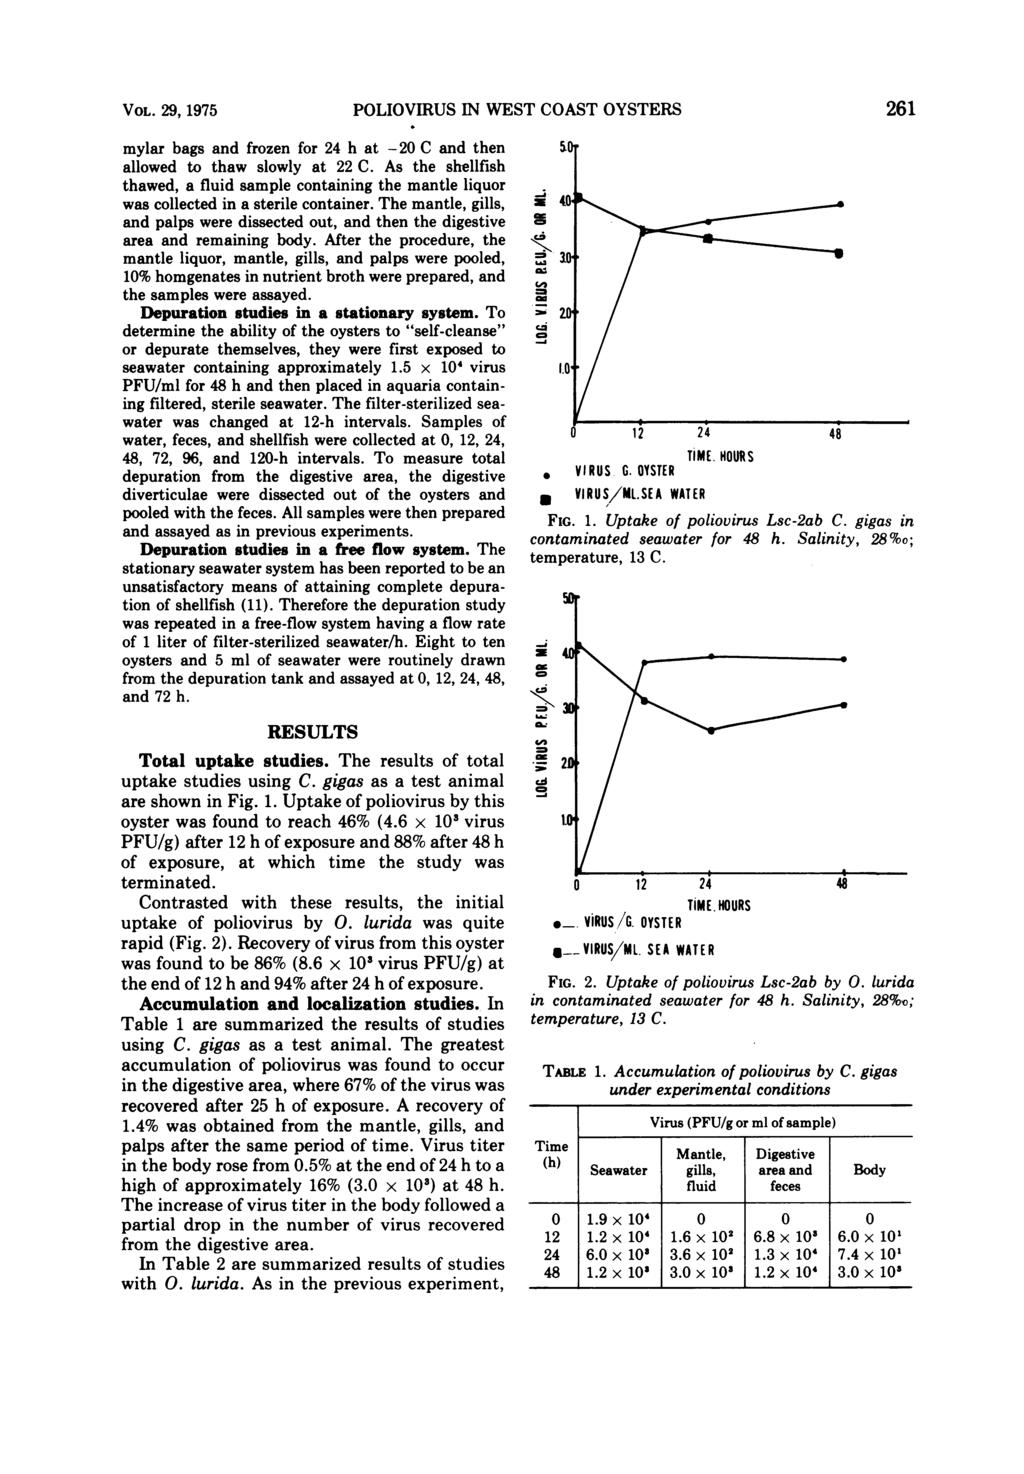 VOL. 29, 1975 POLIOVIRUS IN WEST COAST OYSTERS 261 mylar bags and frozen for 24 h at -20 C and then allowed to thaw slowly at 22 C.